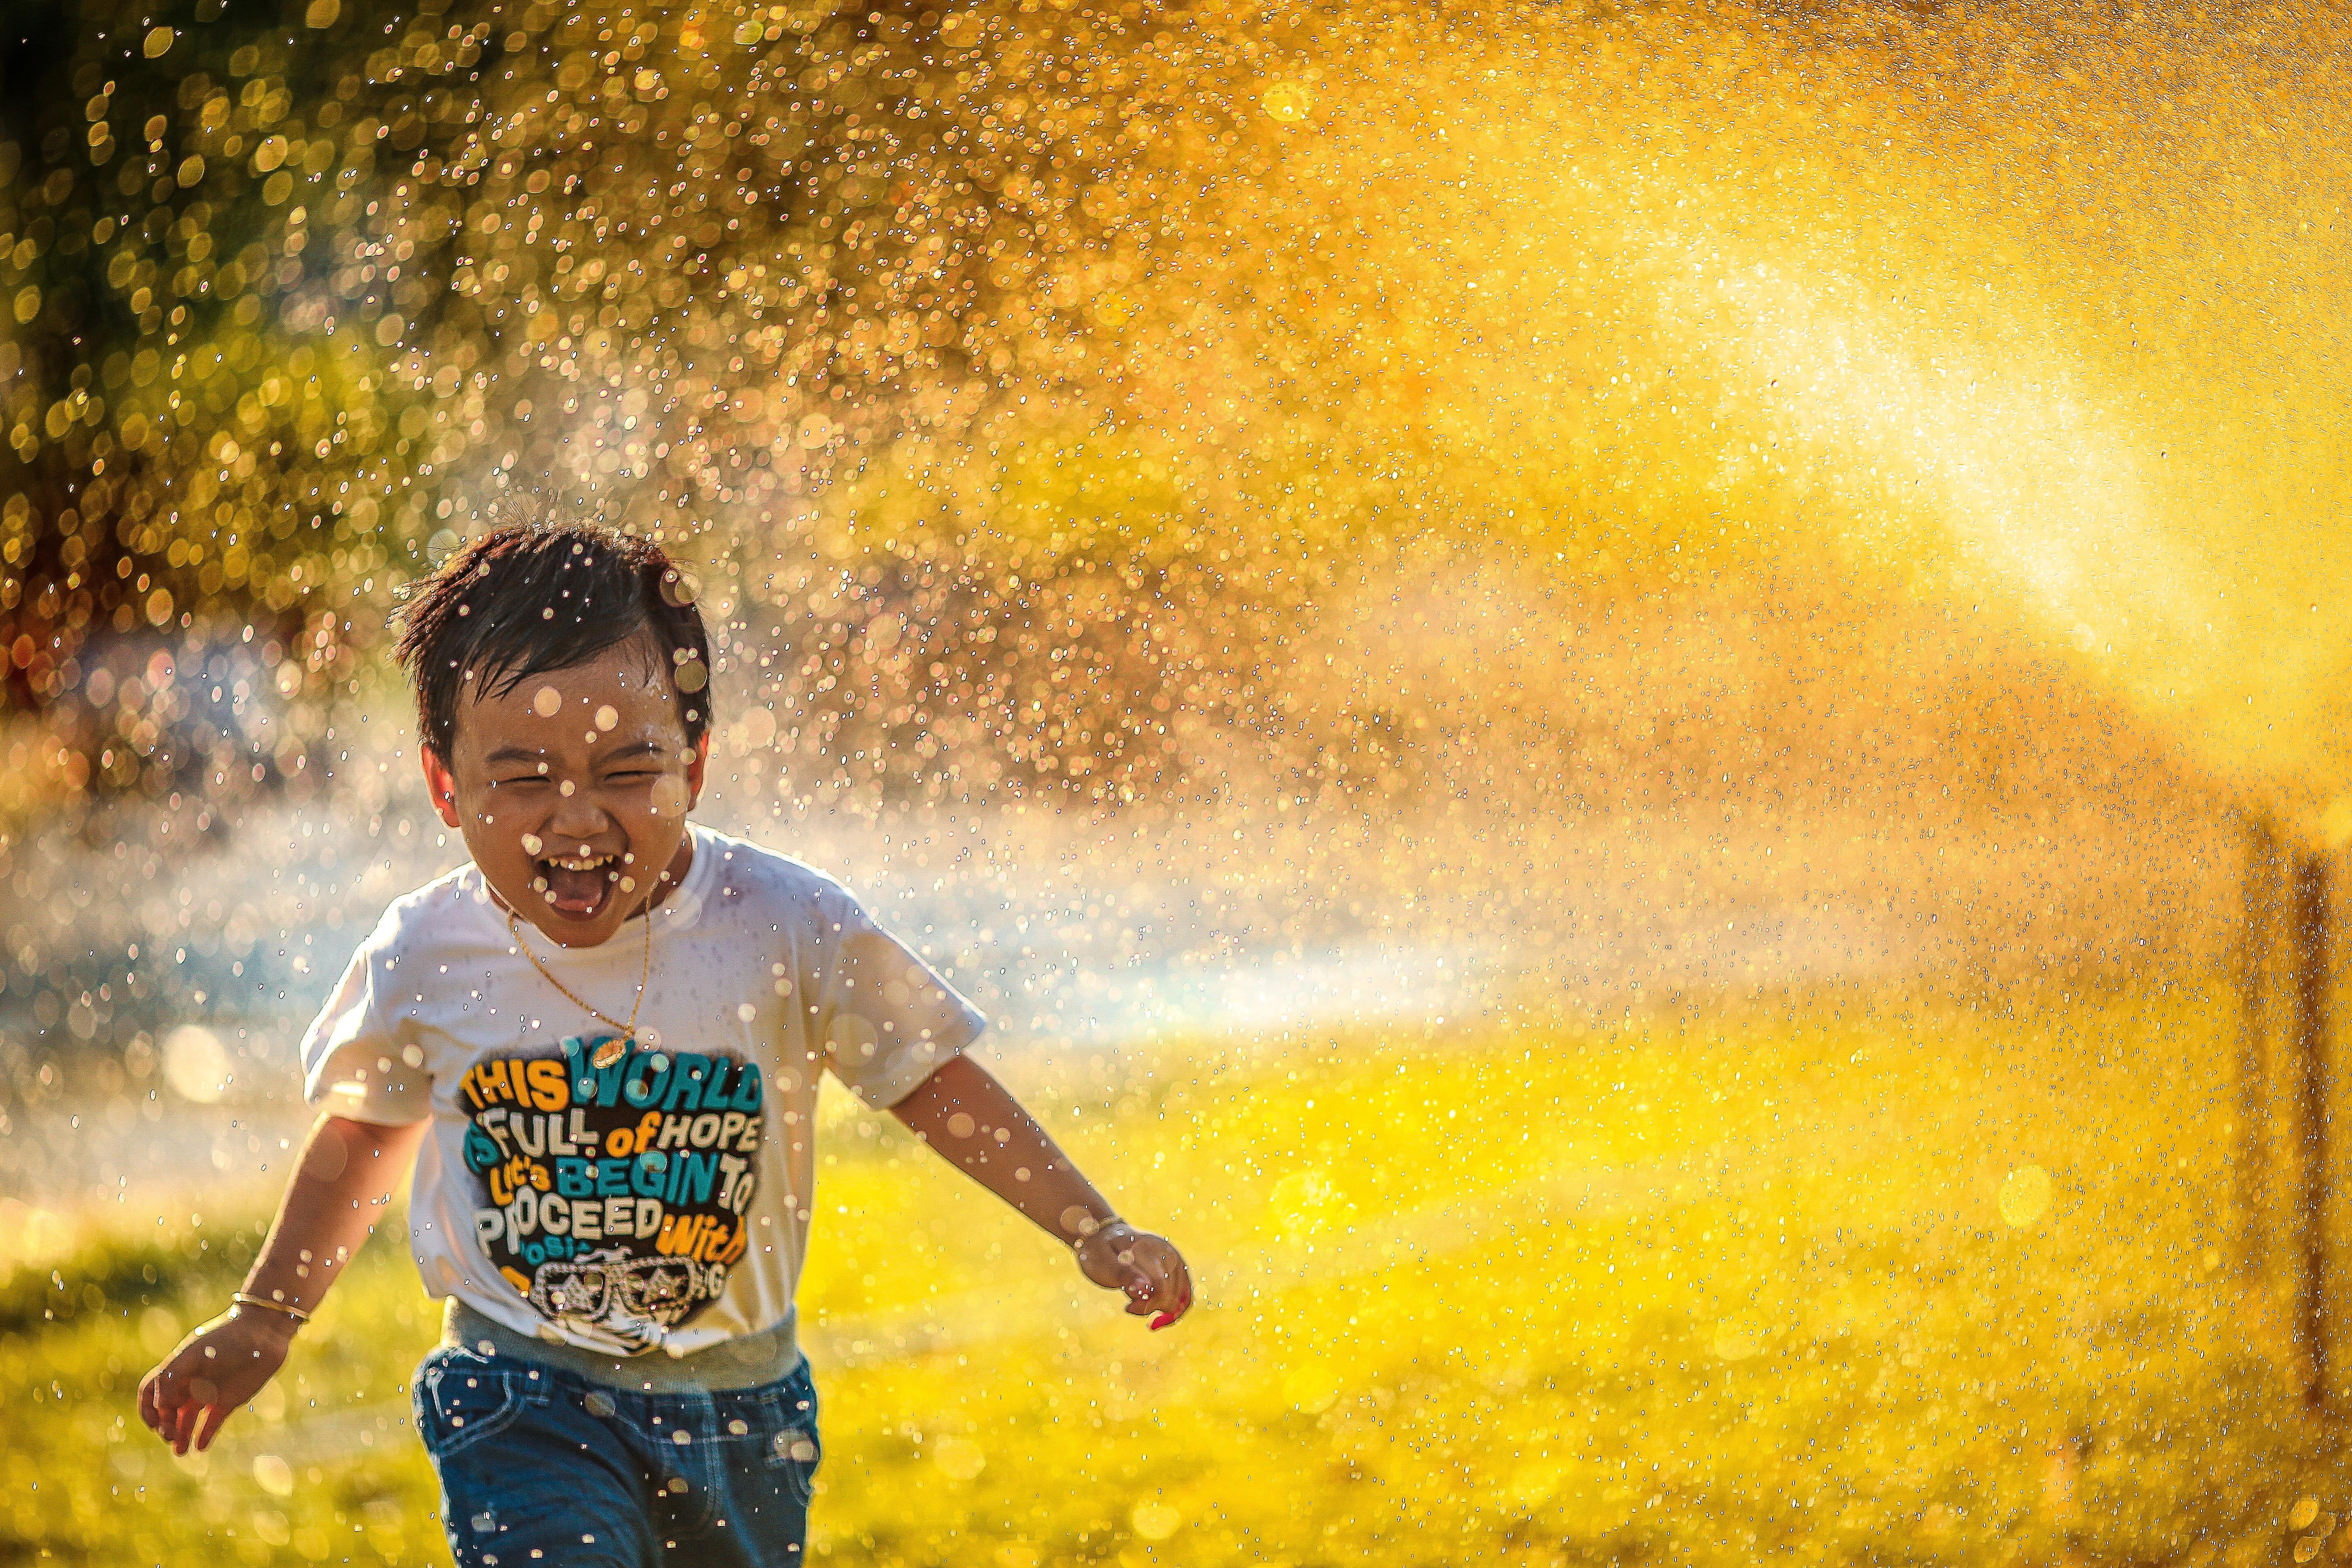 A child playing with the sprinklers | Source: Unsplash.com